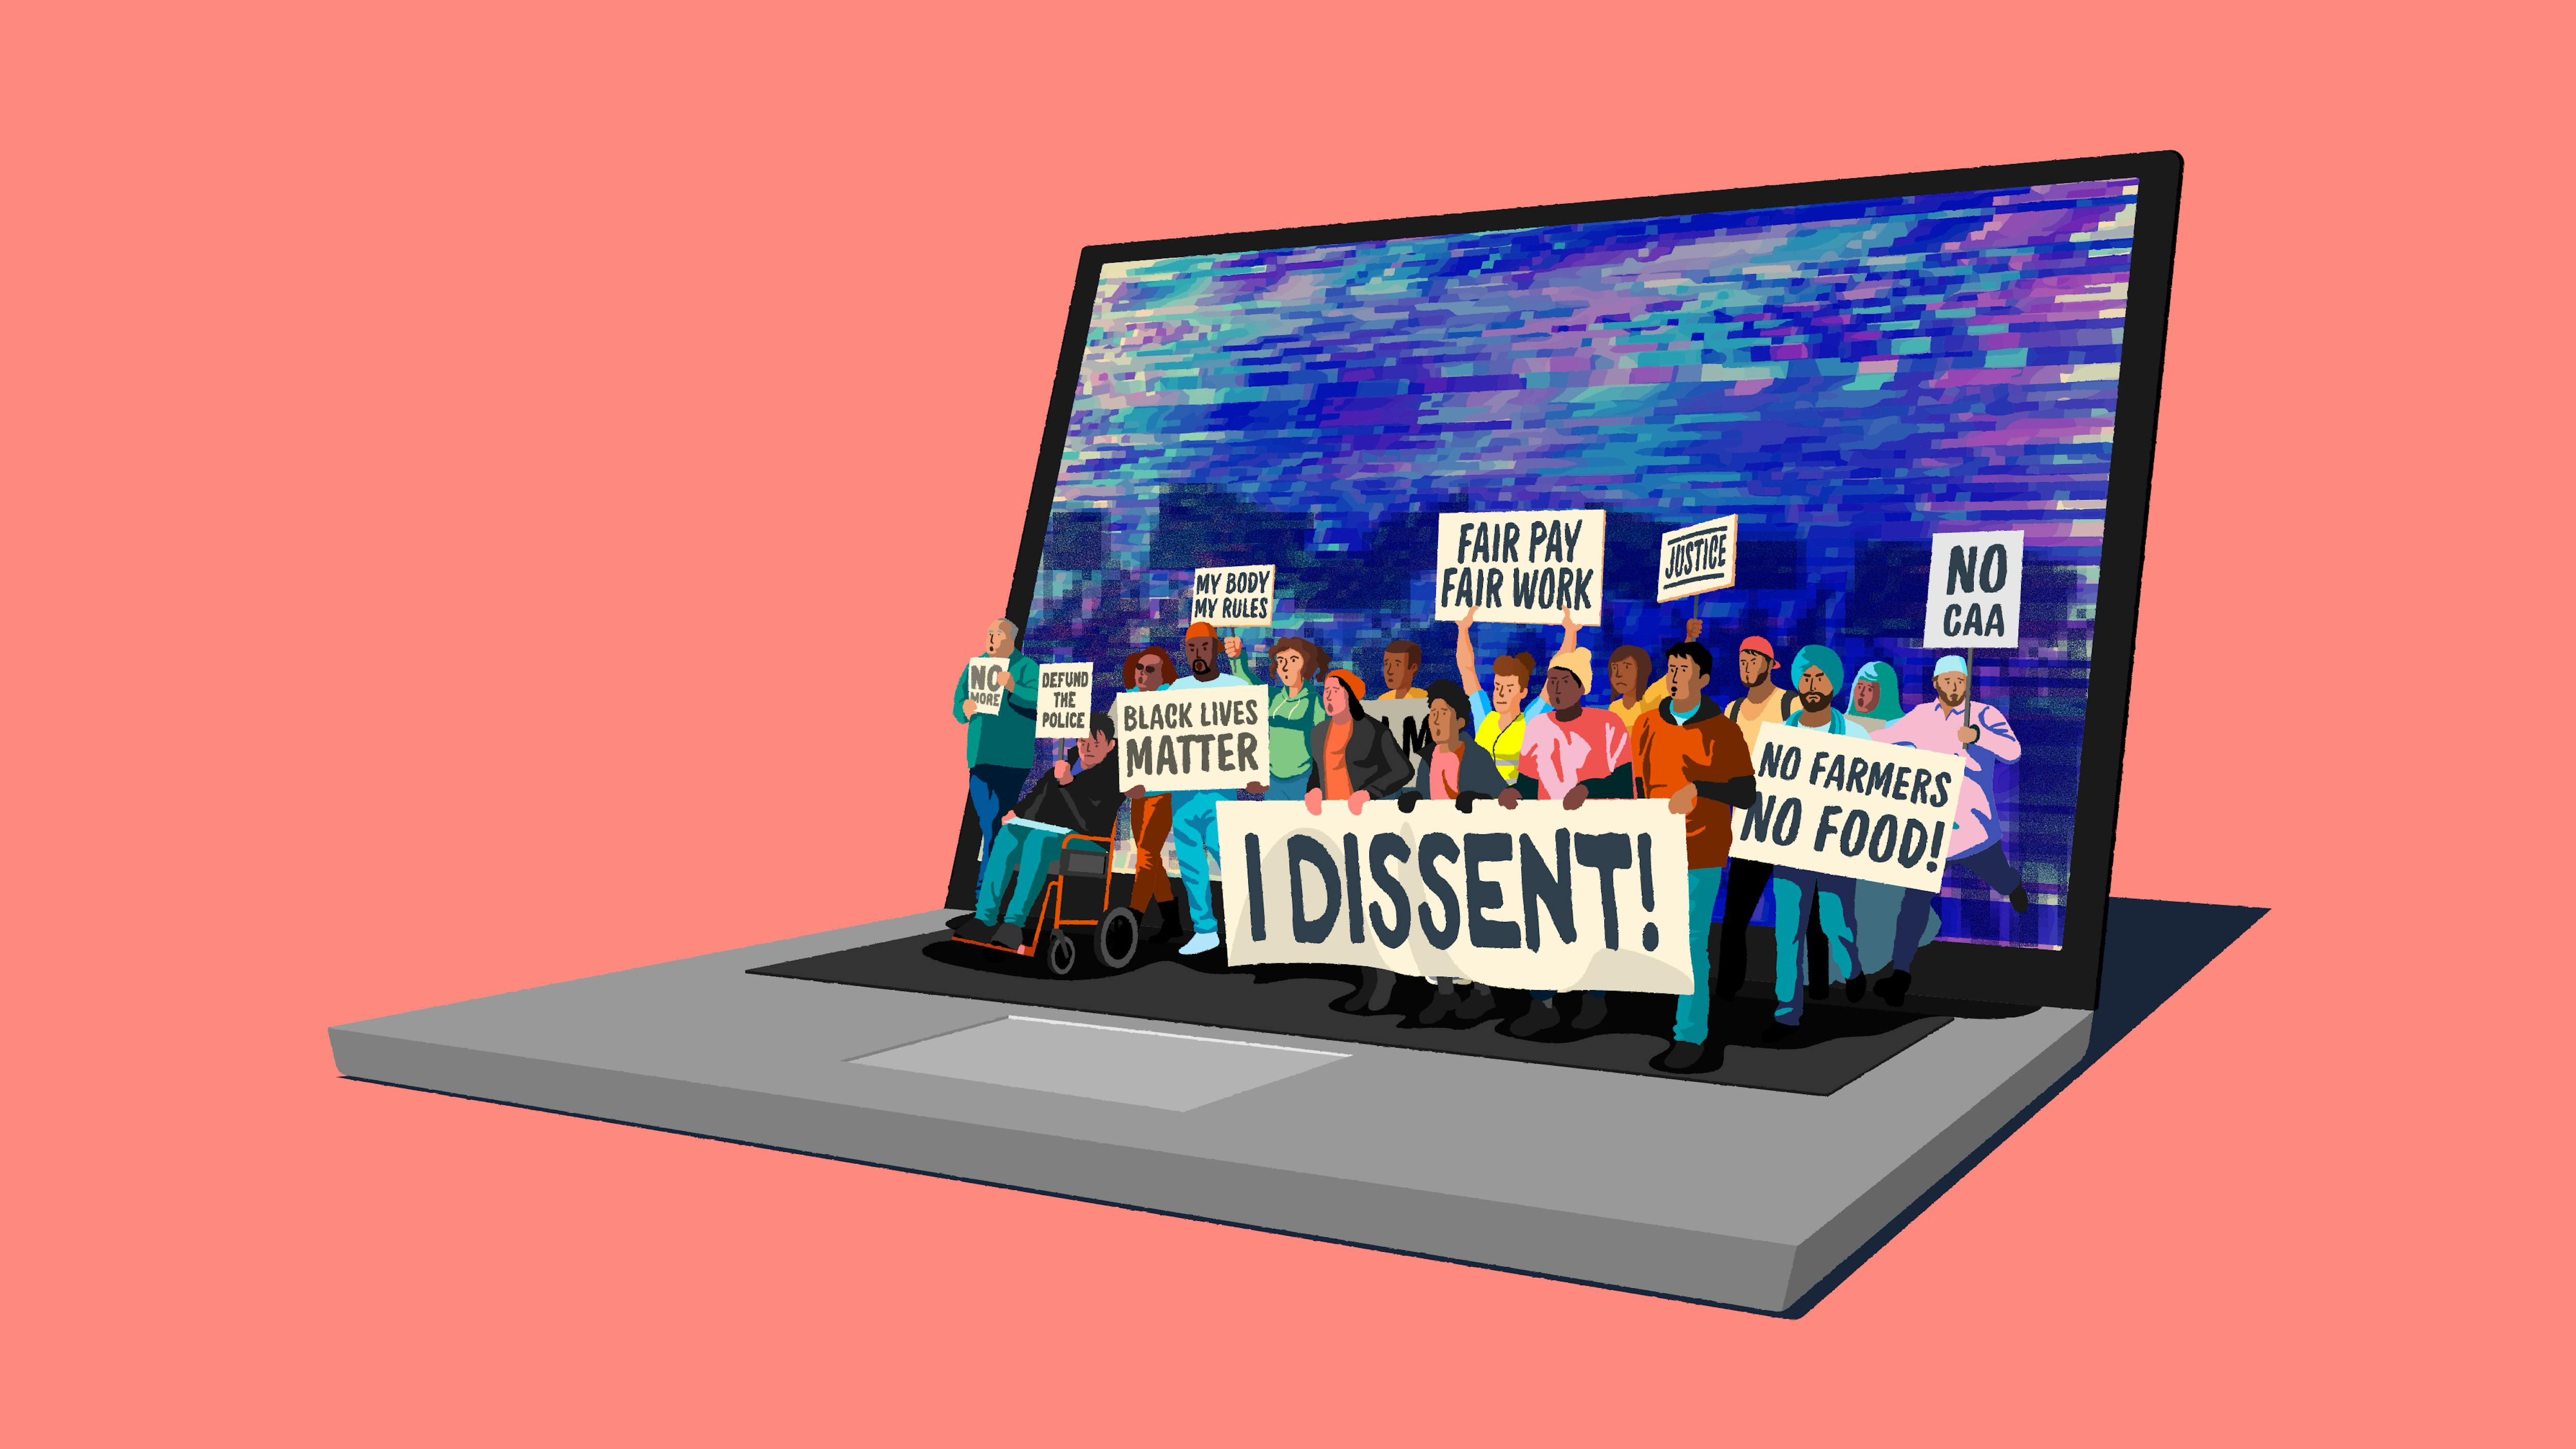 Dissenters of all kinds march out of a laptop computer screen.